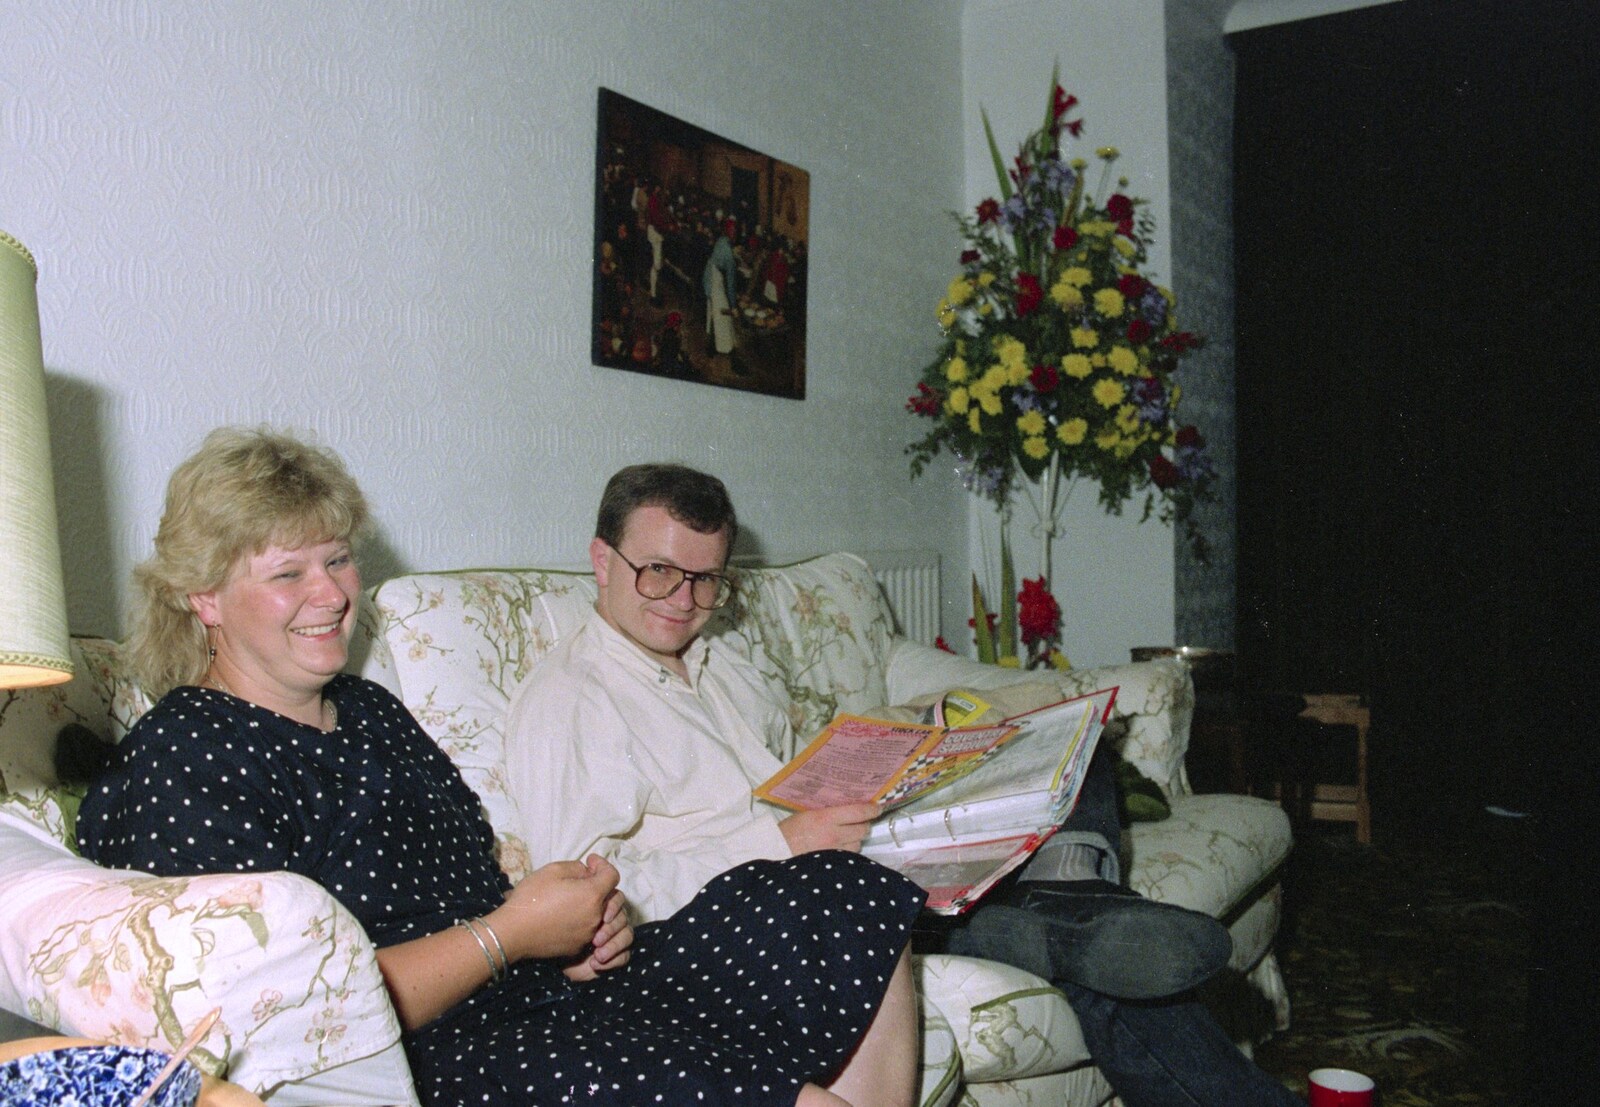 Chris and Phil's Party, Hordle, Hampshire - 6th September 1989: Anna and Hamish on the sofa